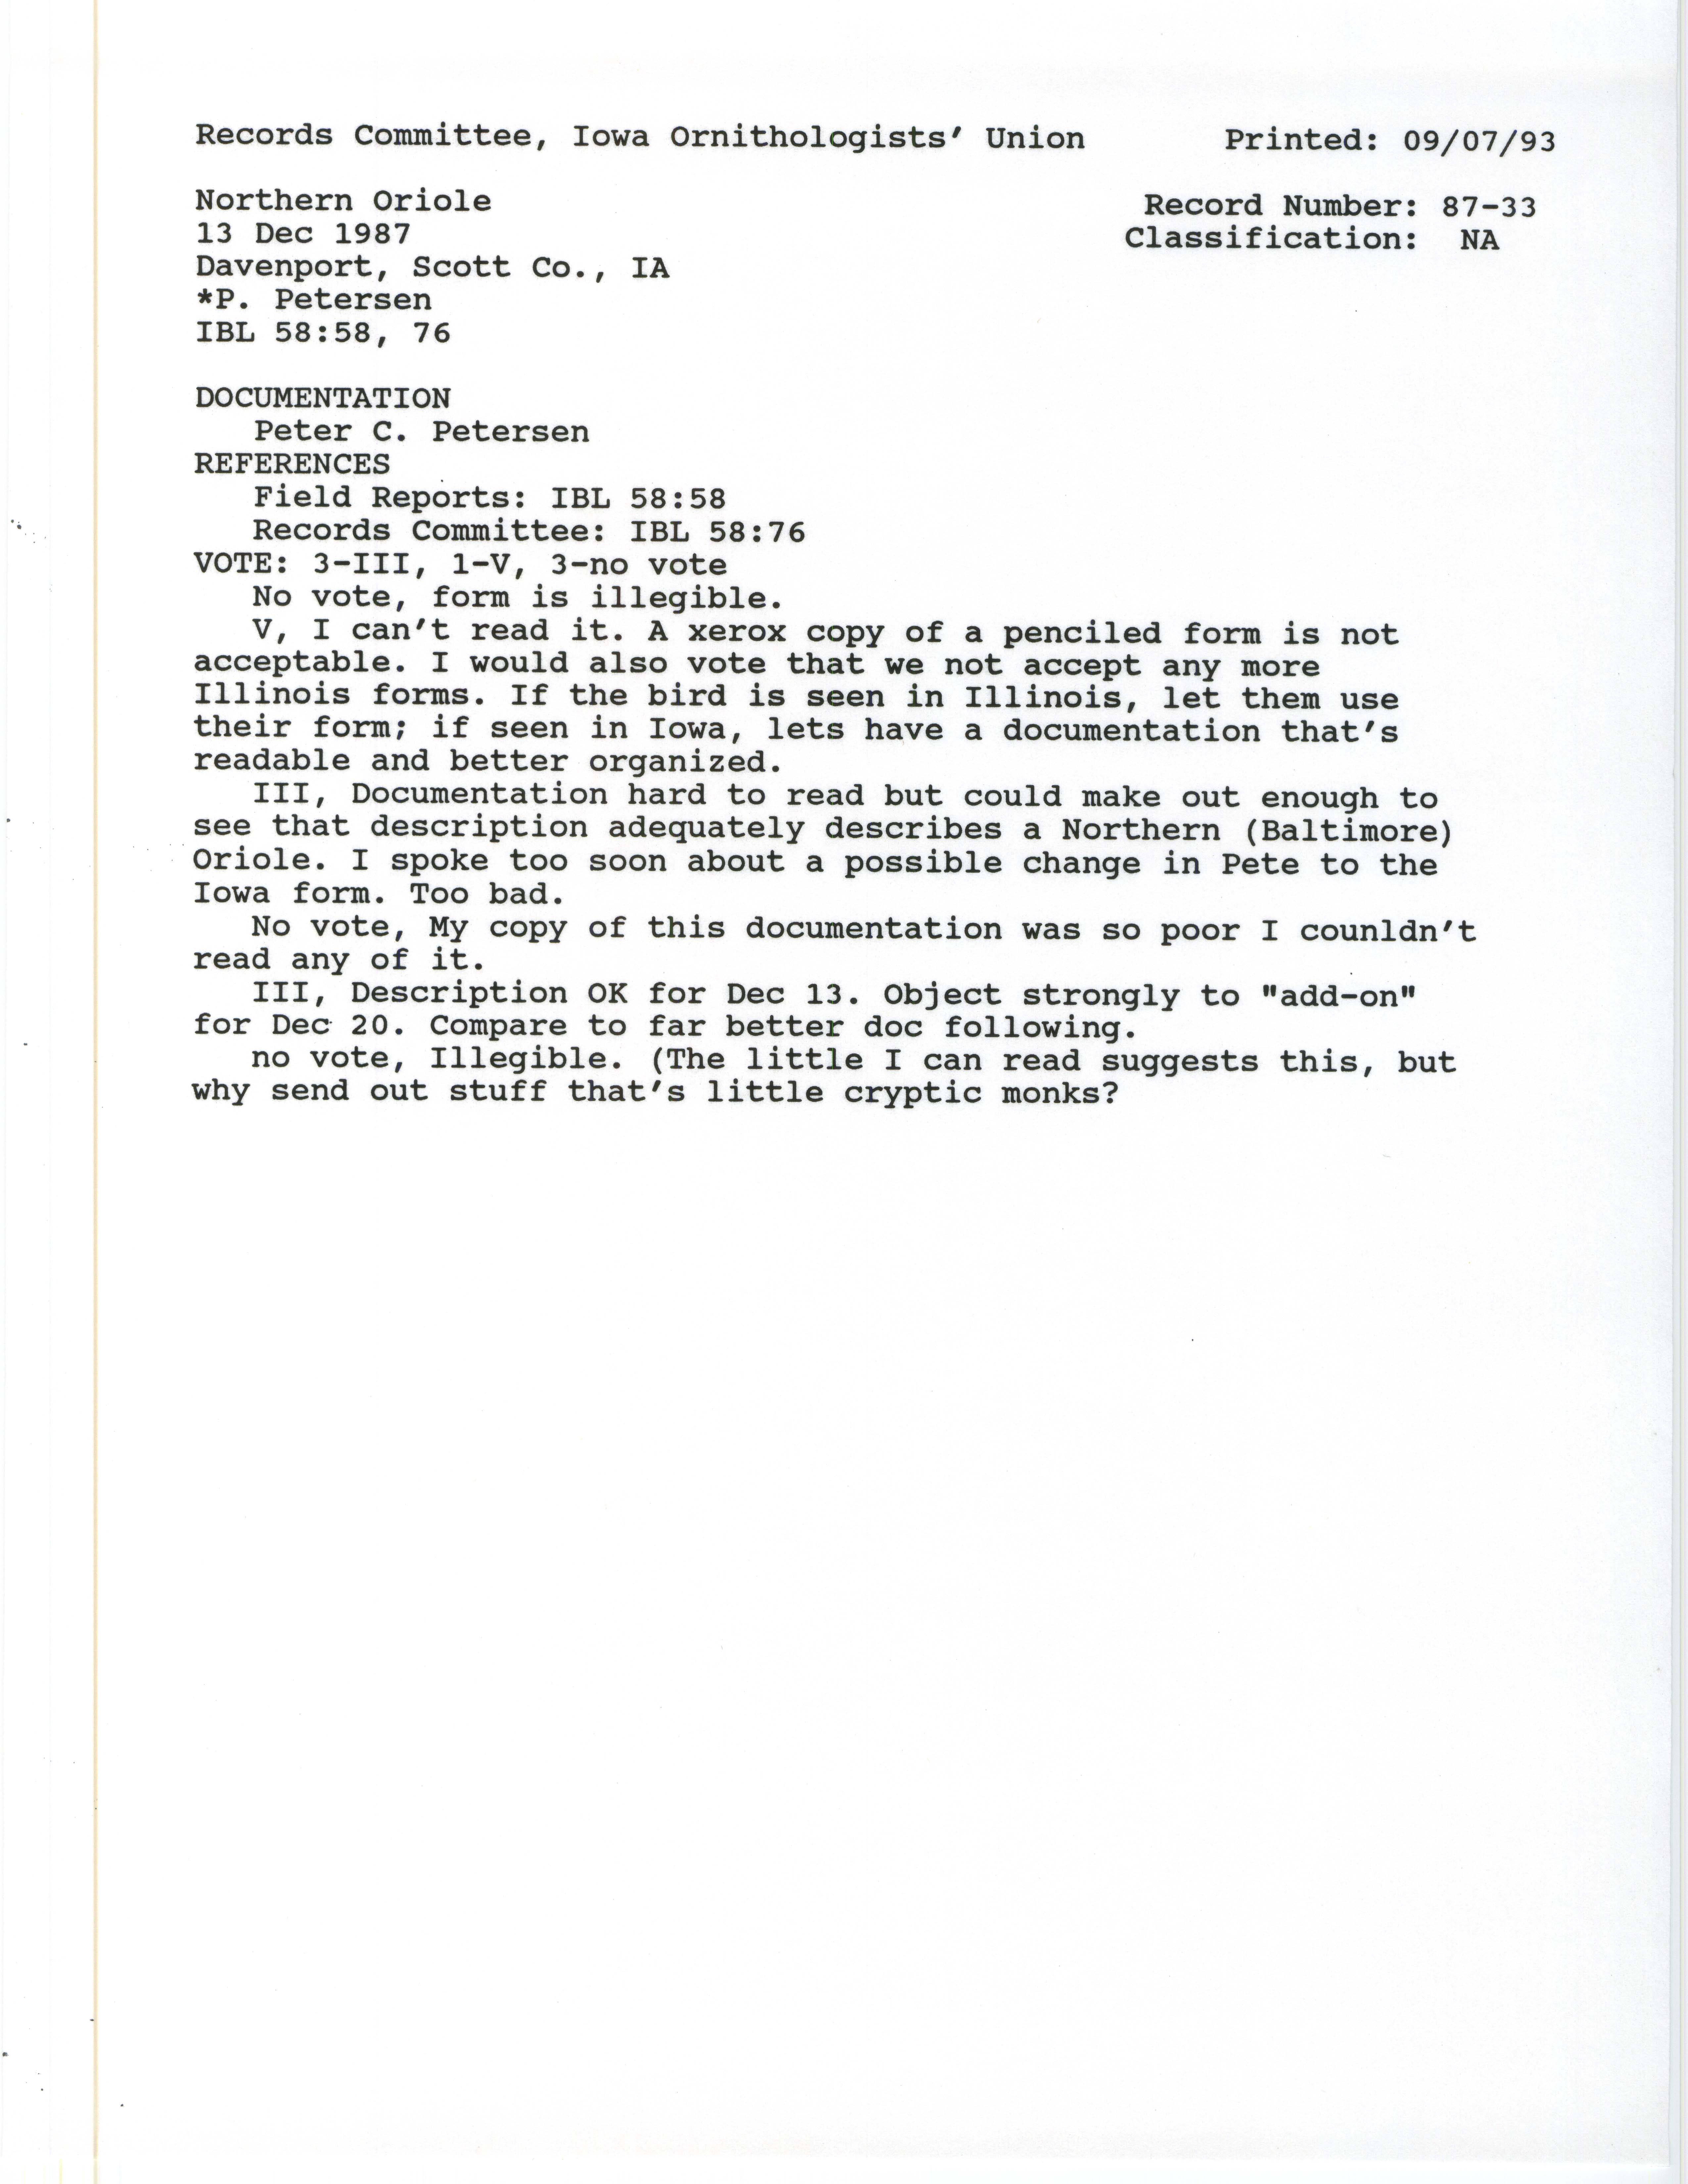 Records Committee review for rare bird sighting for Northern Oriole at Davenport, 1987